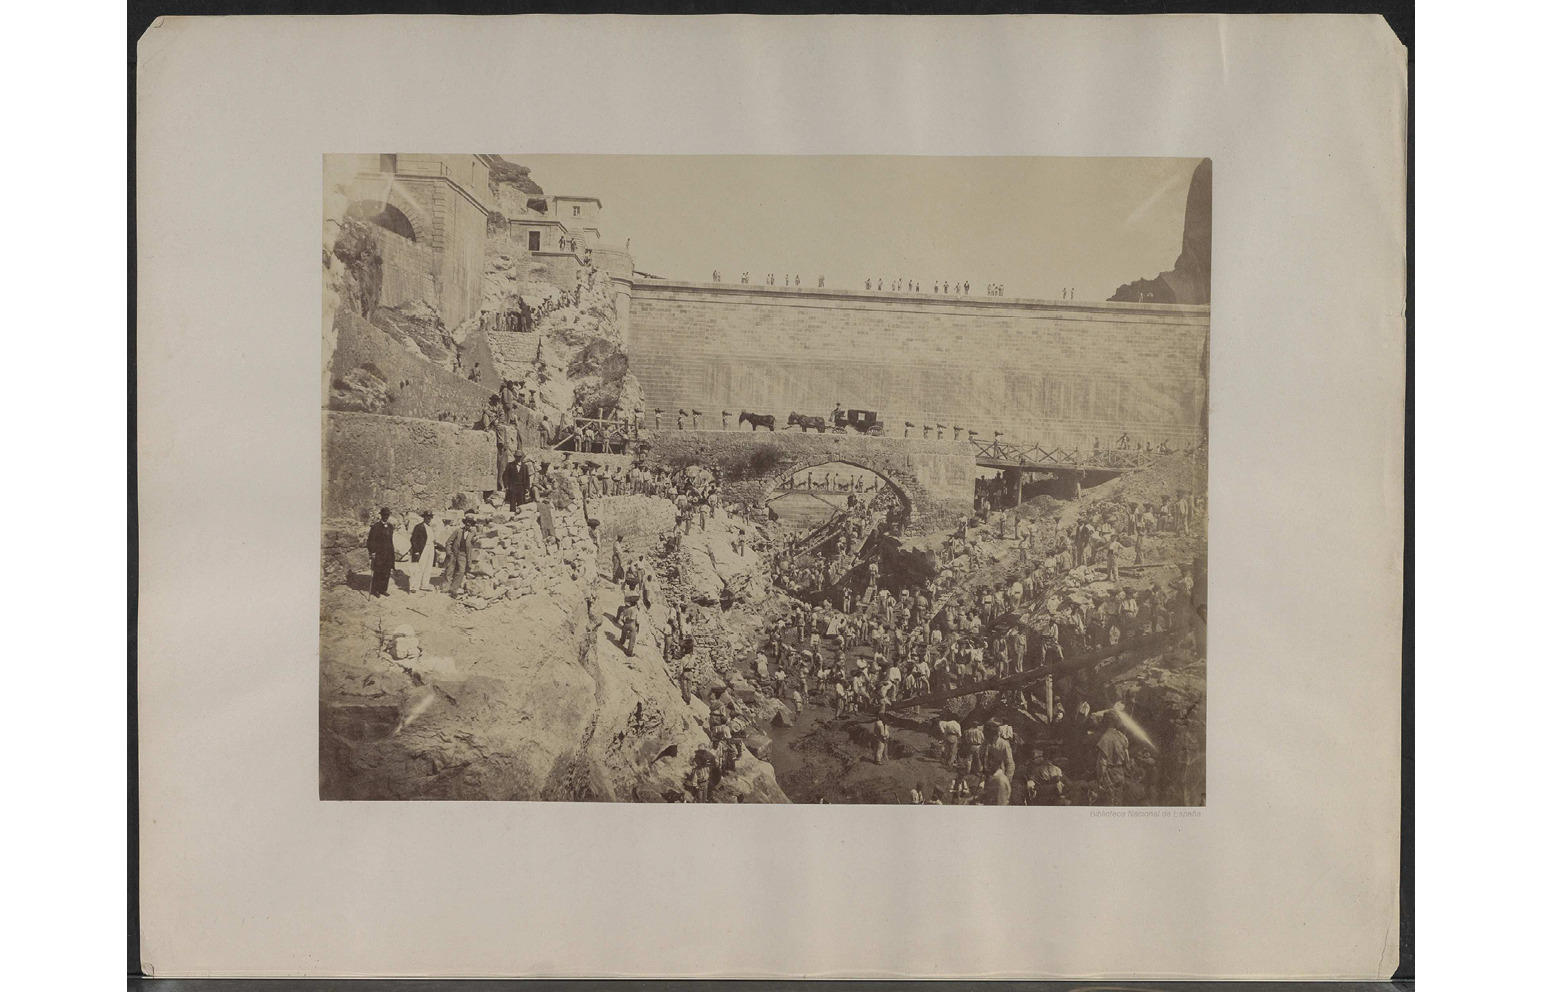 1850s black and white photograph: shows a dam worksite in Madrid; on the left side, men in suits pose for the camera; rest of the image depicts a line of workers as they walk from the top of the dam all the way down to the canal; in the back, a carriage is drawn by two mules/horses across a bridge connects both sides of the canal.